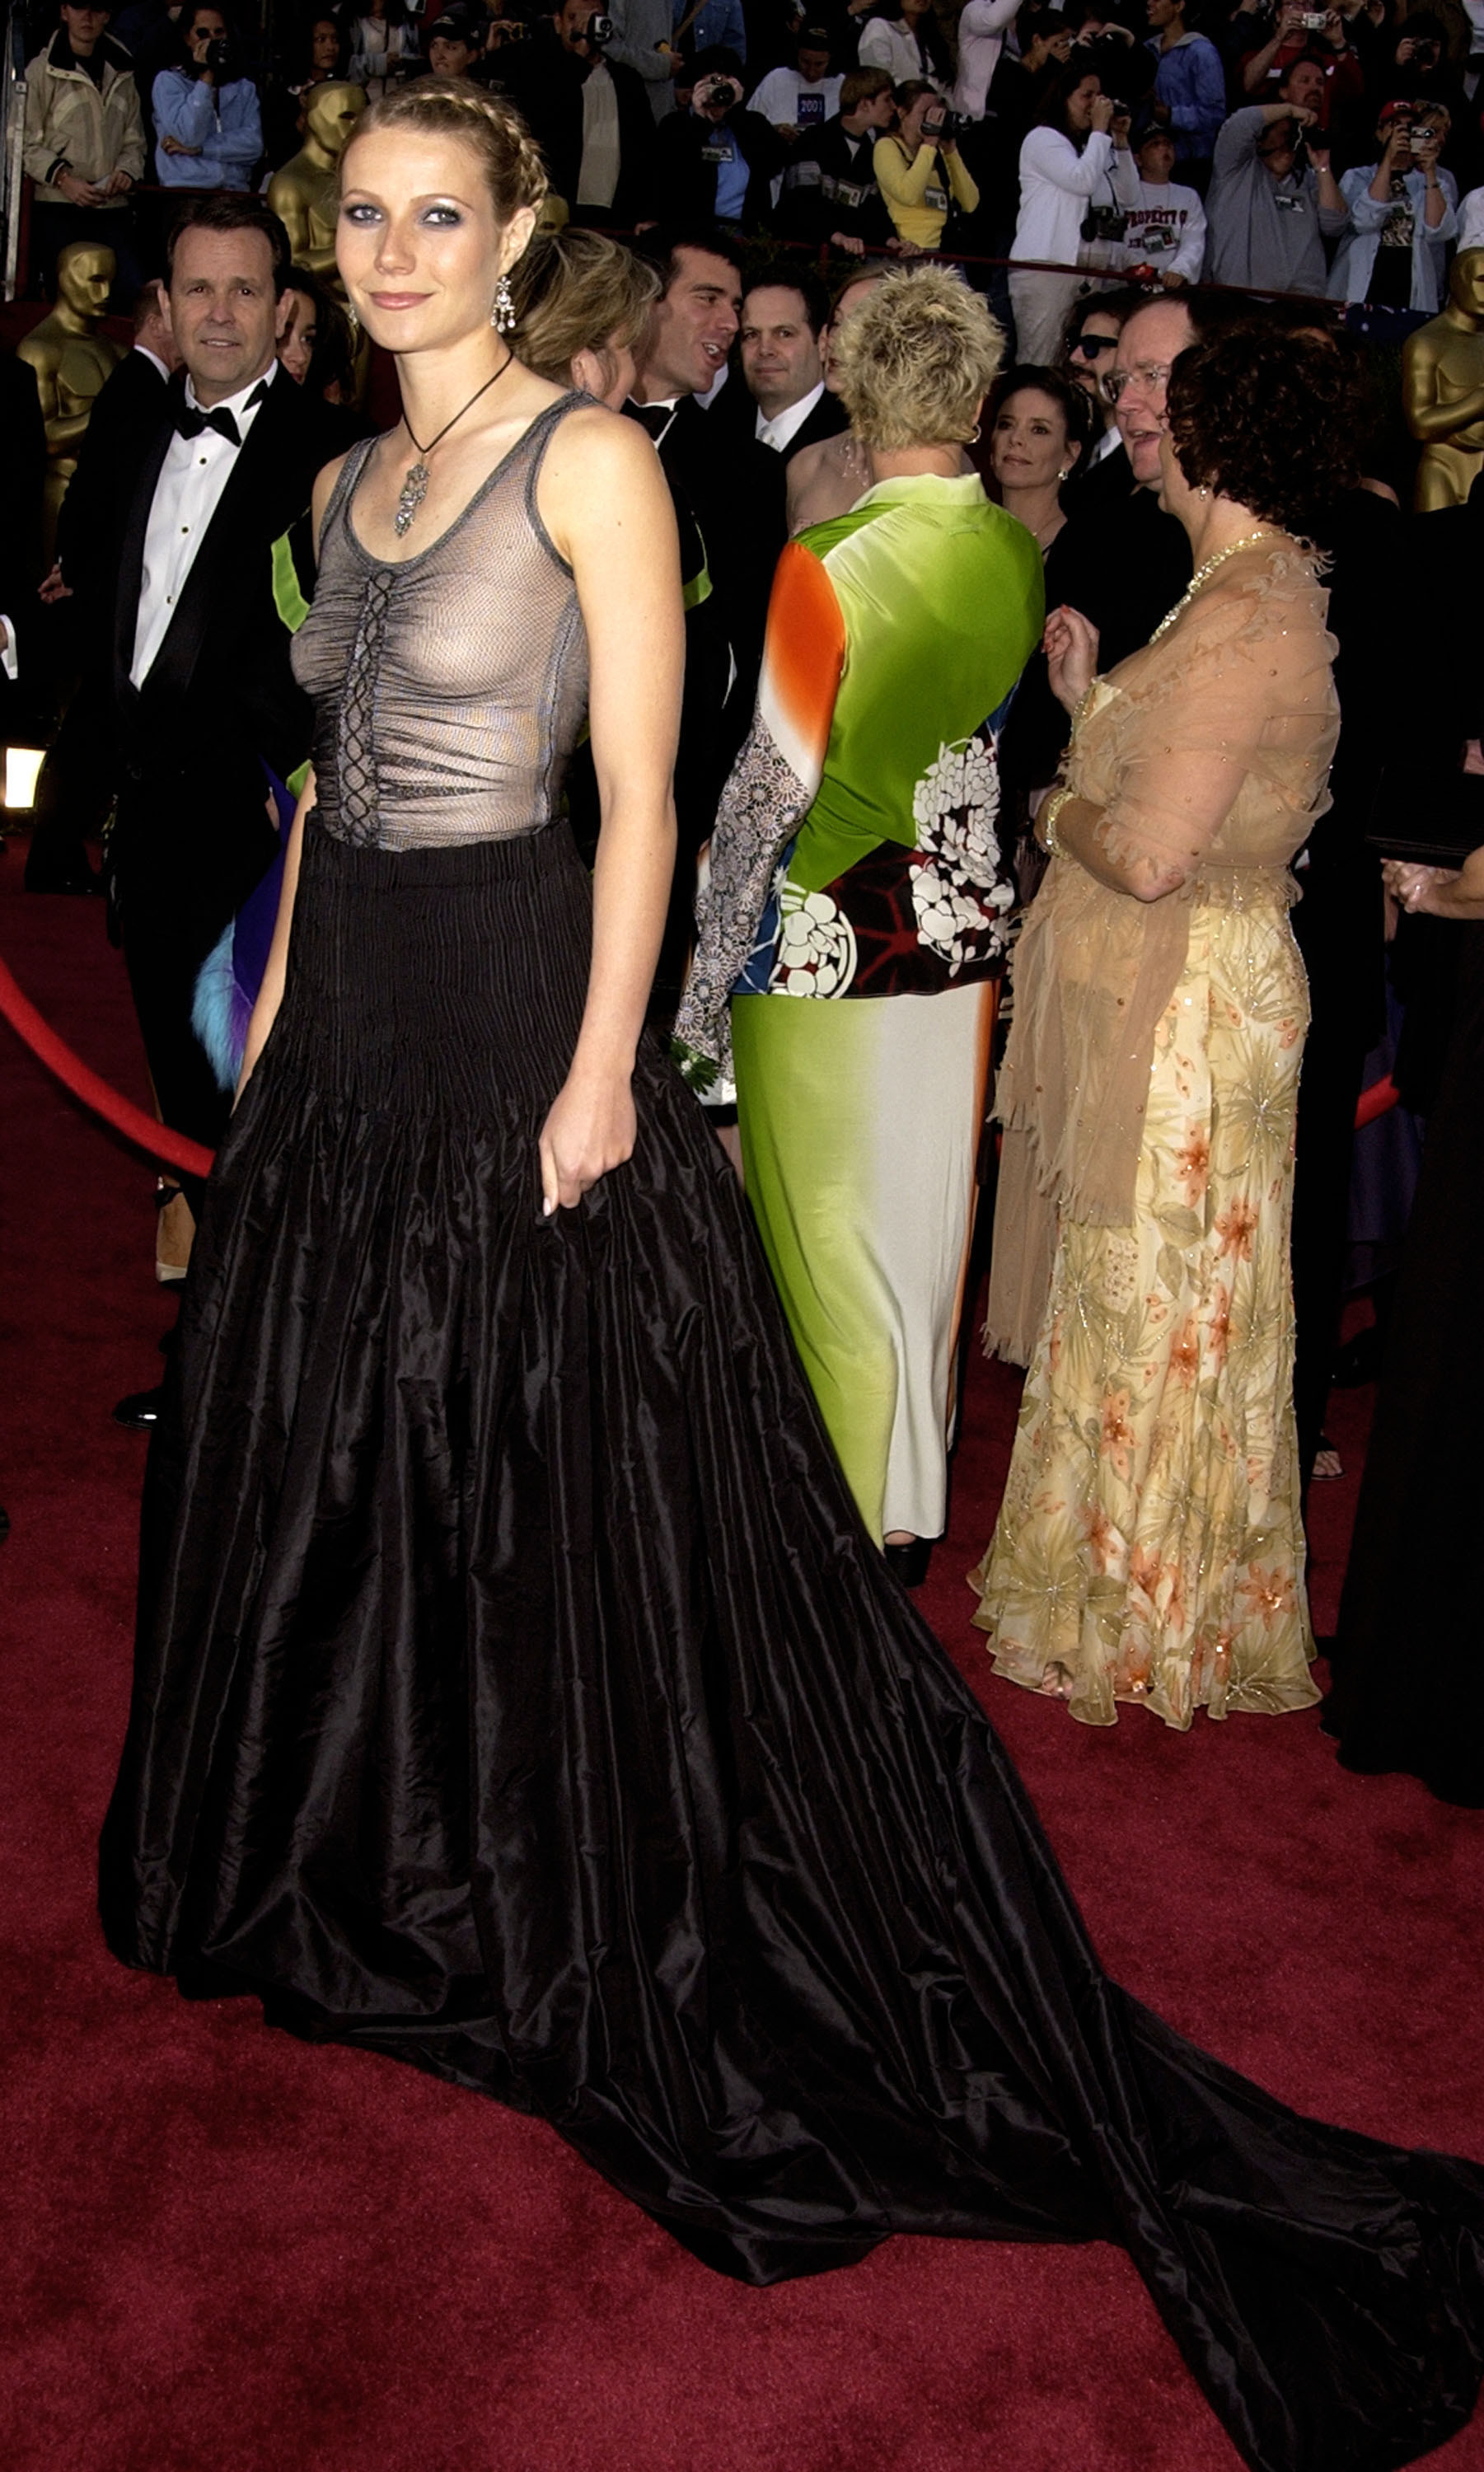 Gwyneth on the red carpet in a gown with a sheer ruched sleeveless top and a satin bottom with short train